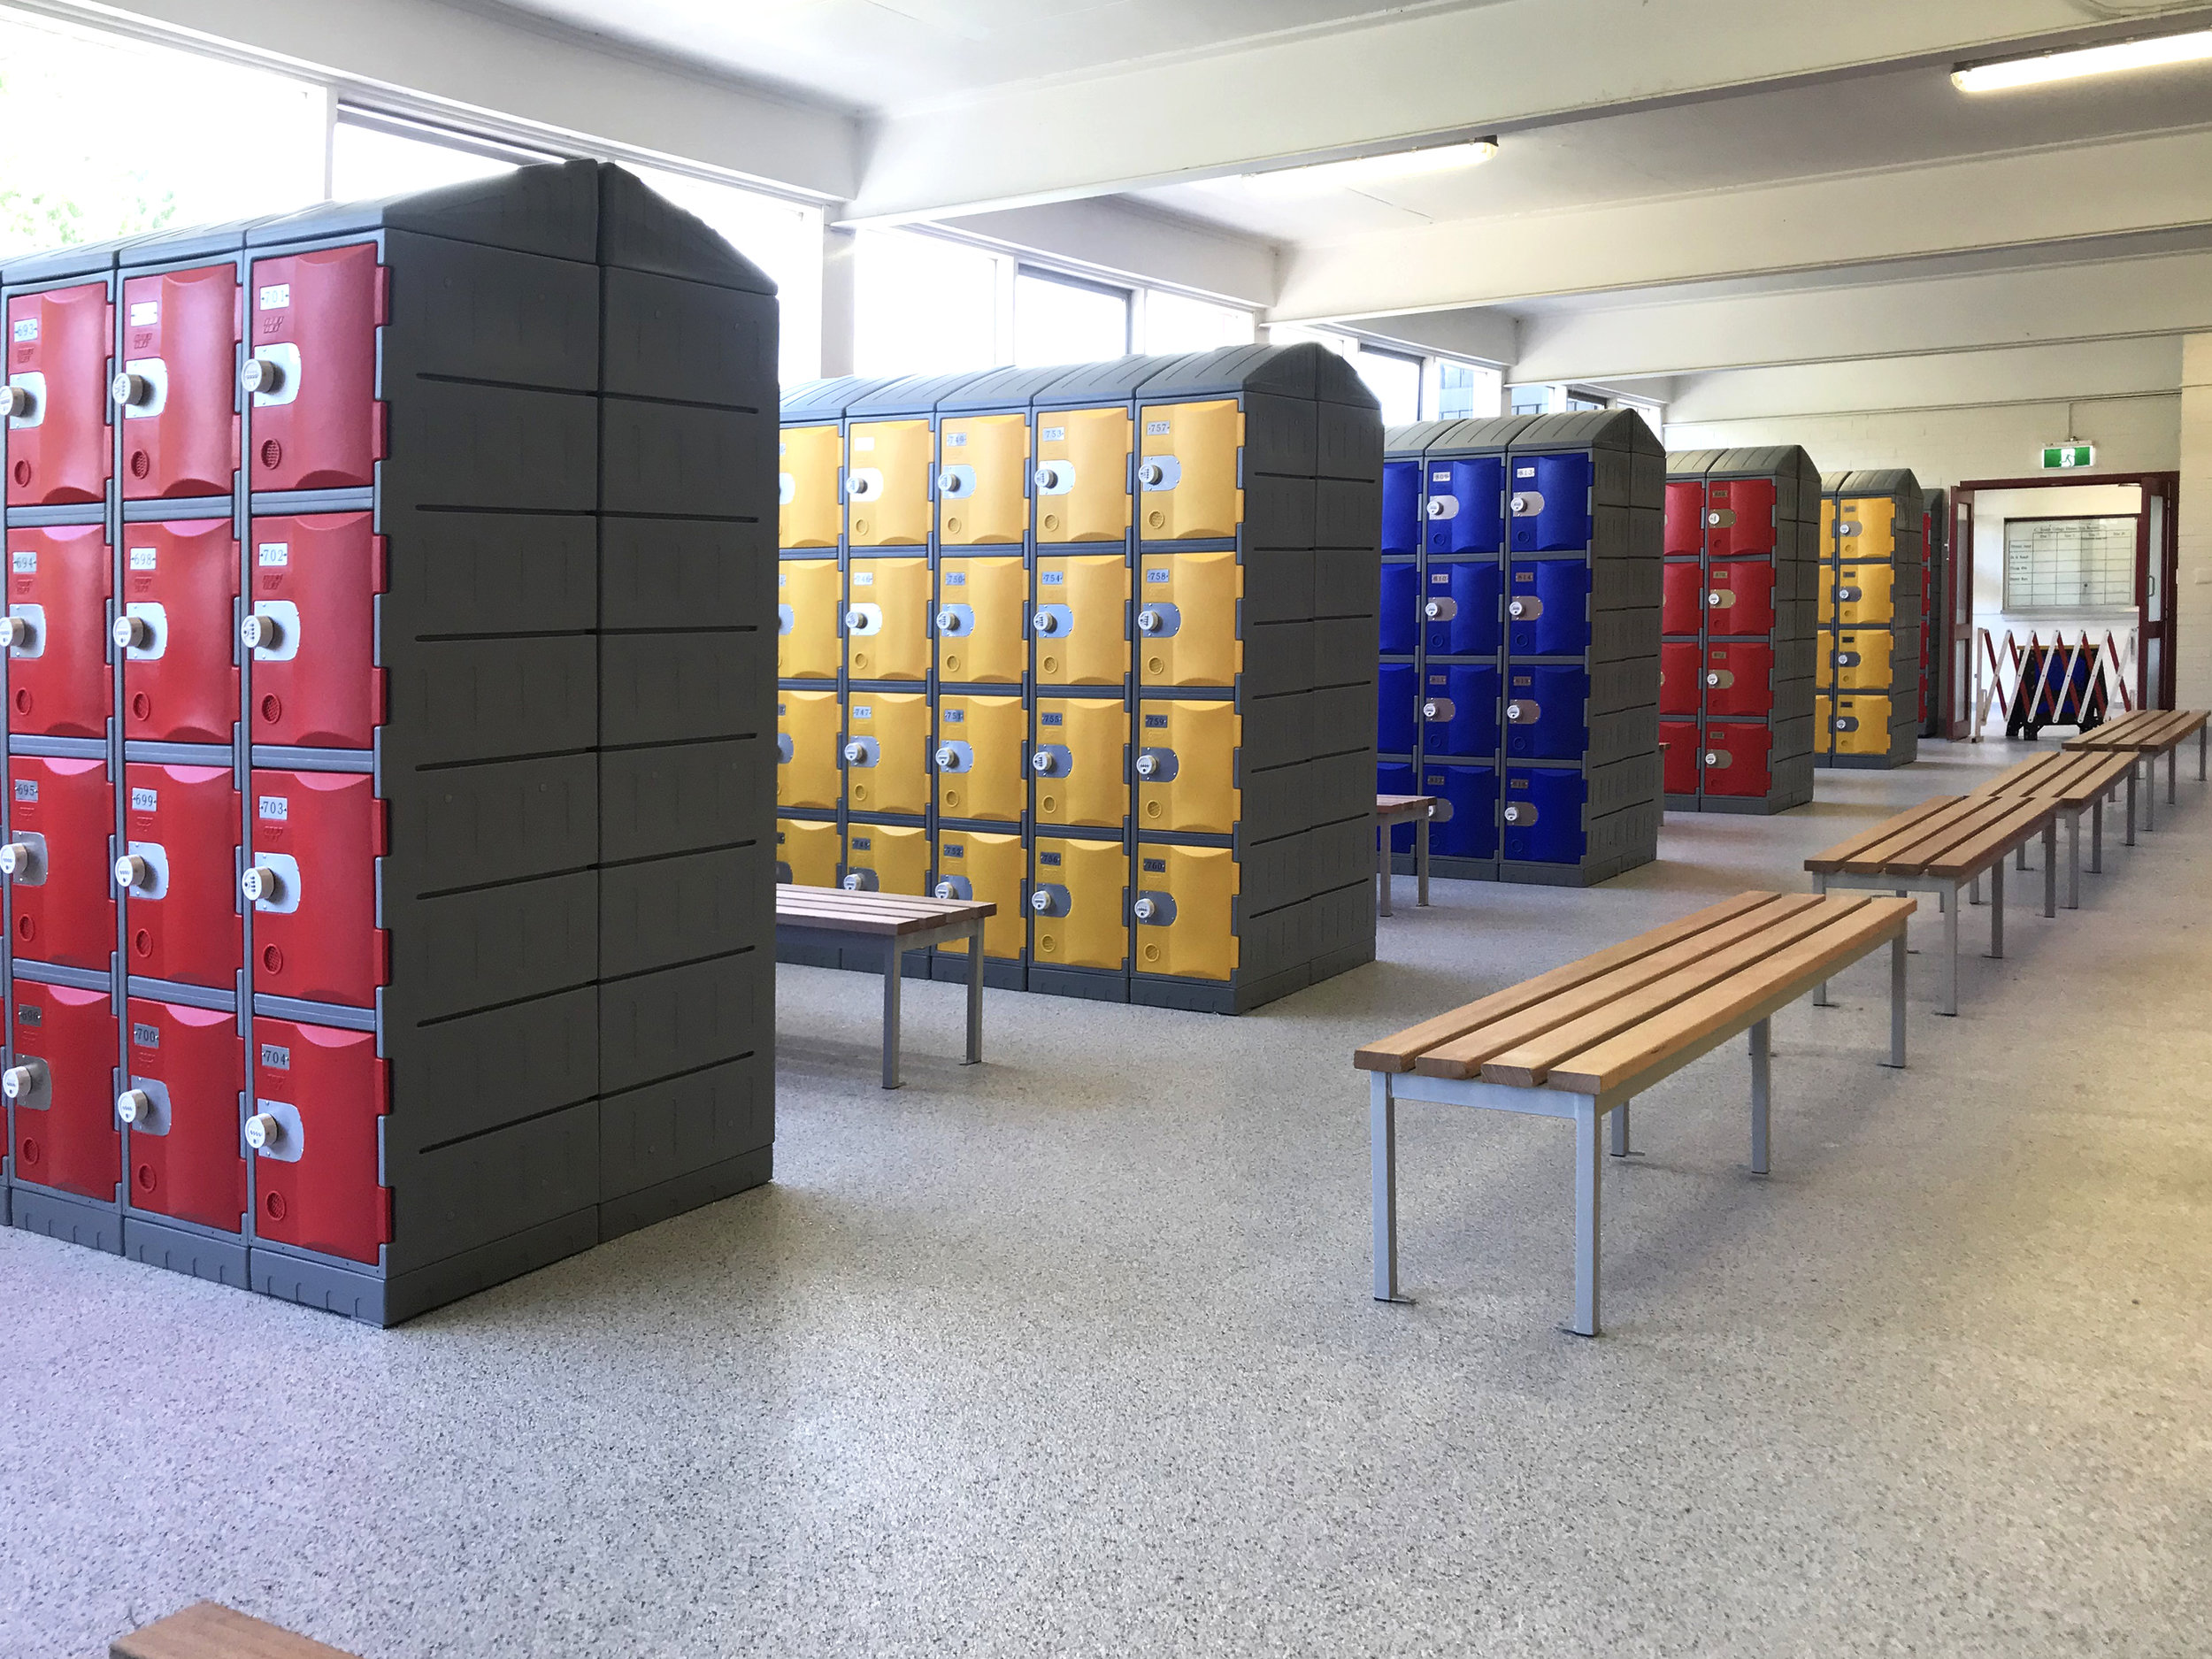 Red, yellow, and blue heavy duty plastic lockers